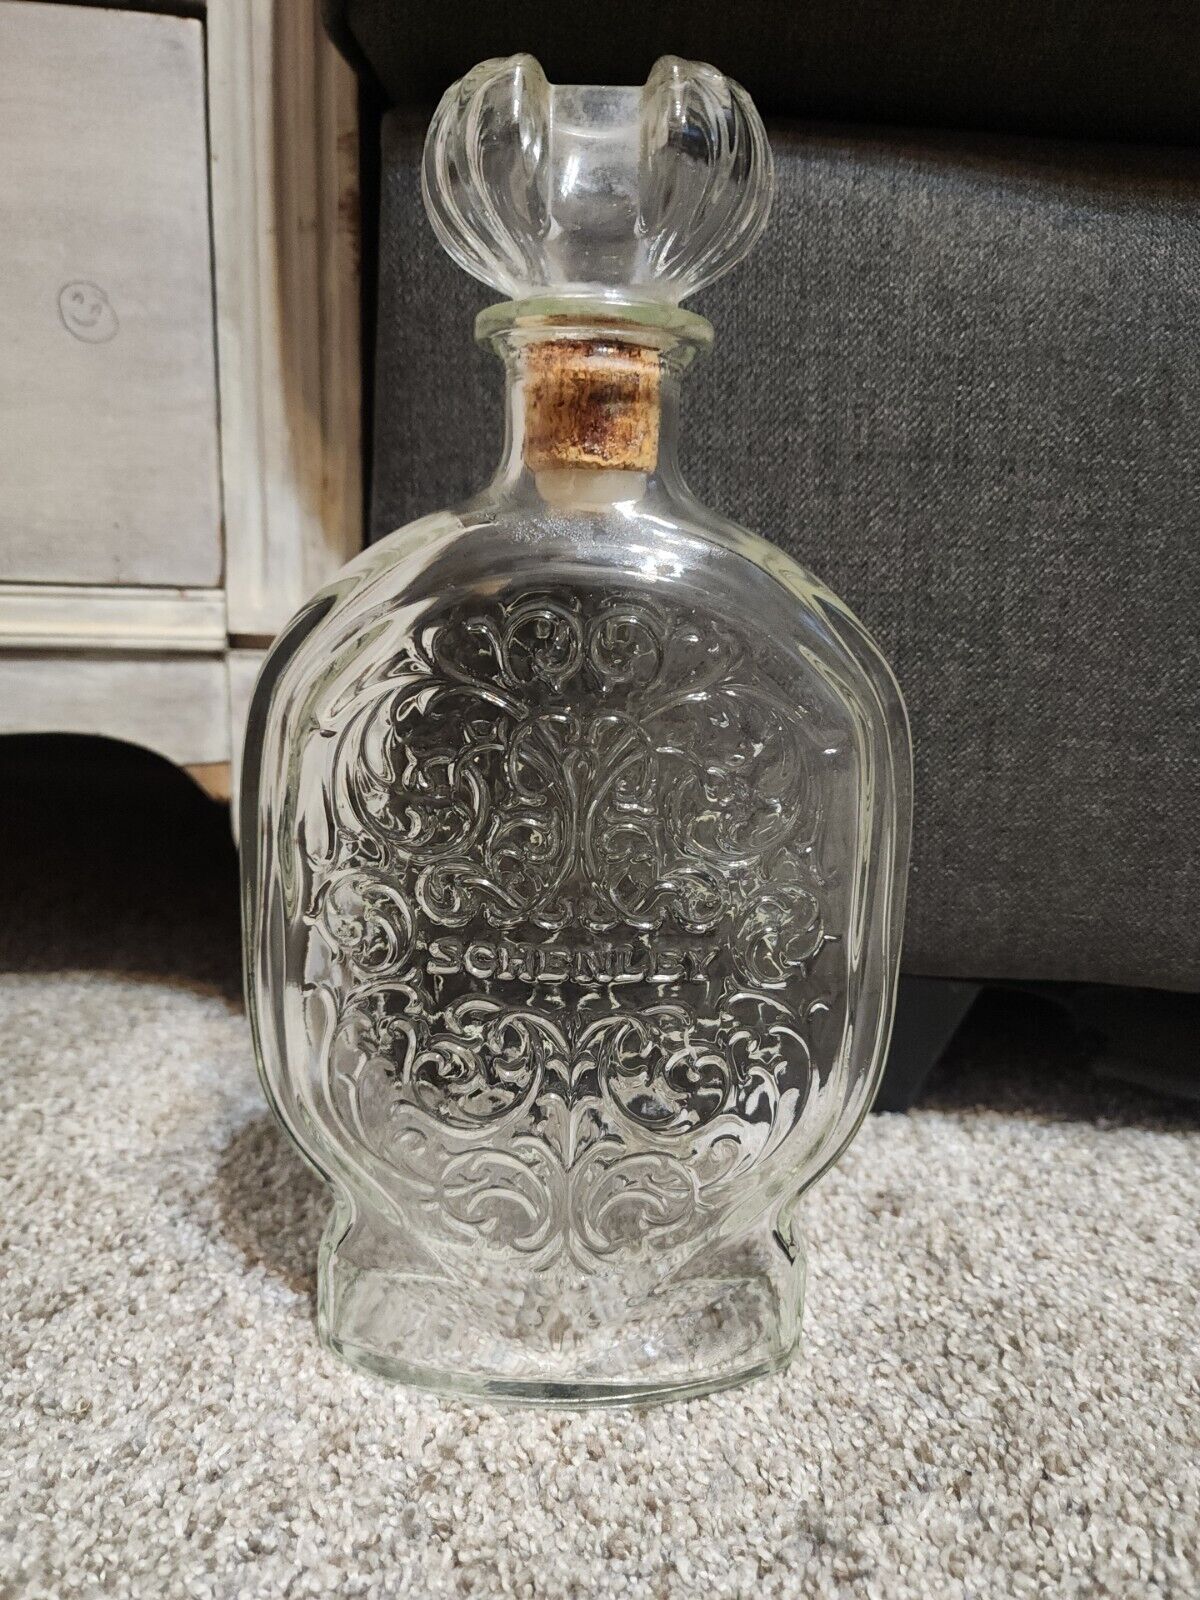 Vintage 1953 Schenley Glass Bottle Empty with Glass Stopper Collectible Decanter